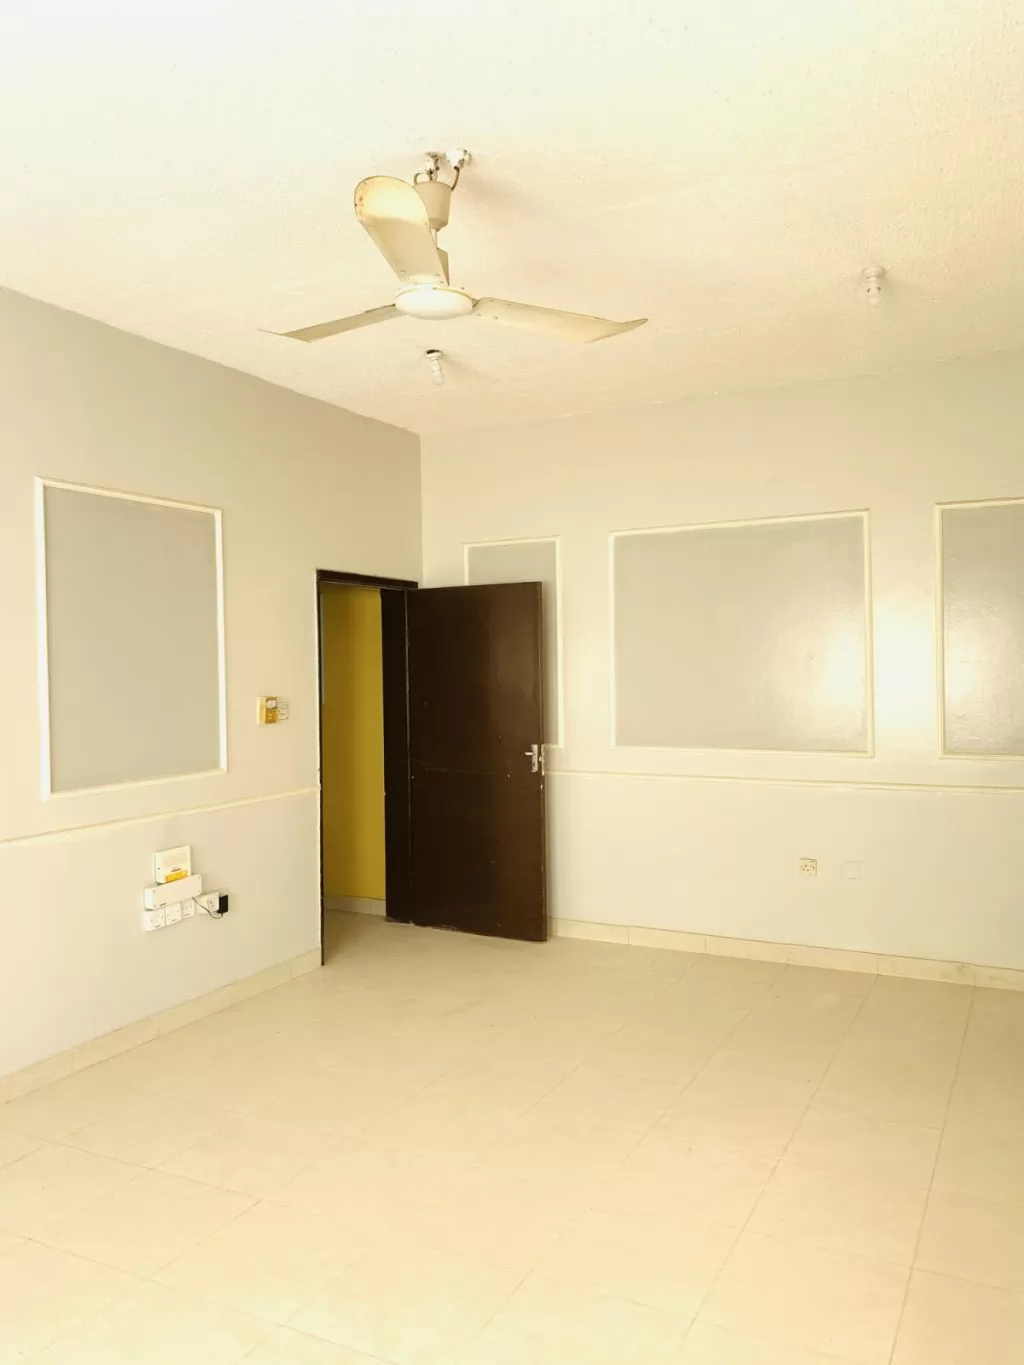 Residential Property 4 Bedrooms U/F Apartment  for rent in Old-Airport , Doha-Qatar #13170 - 1  image 